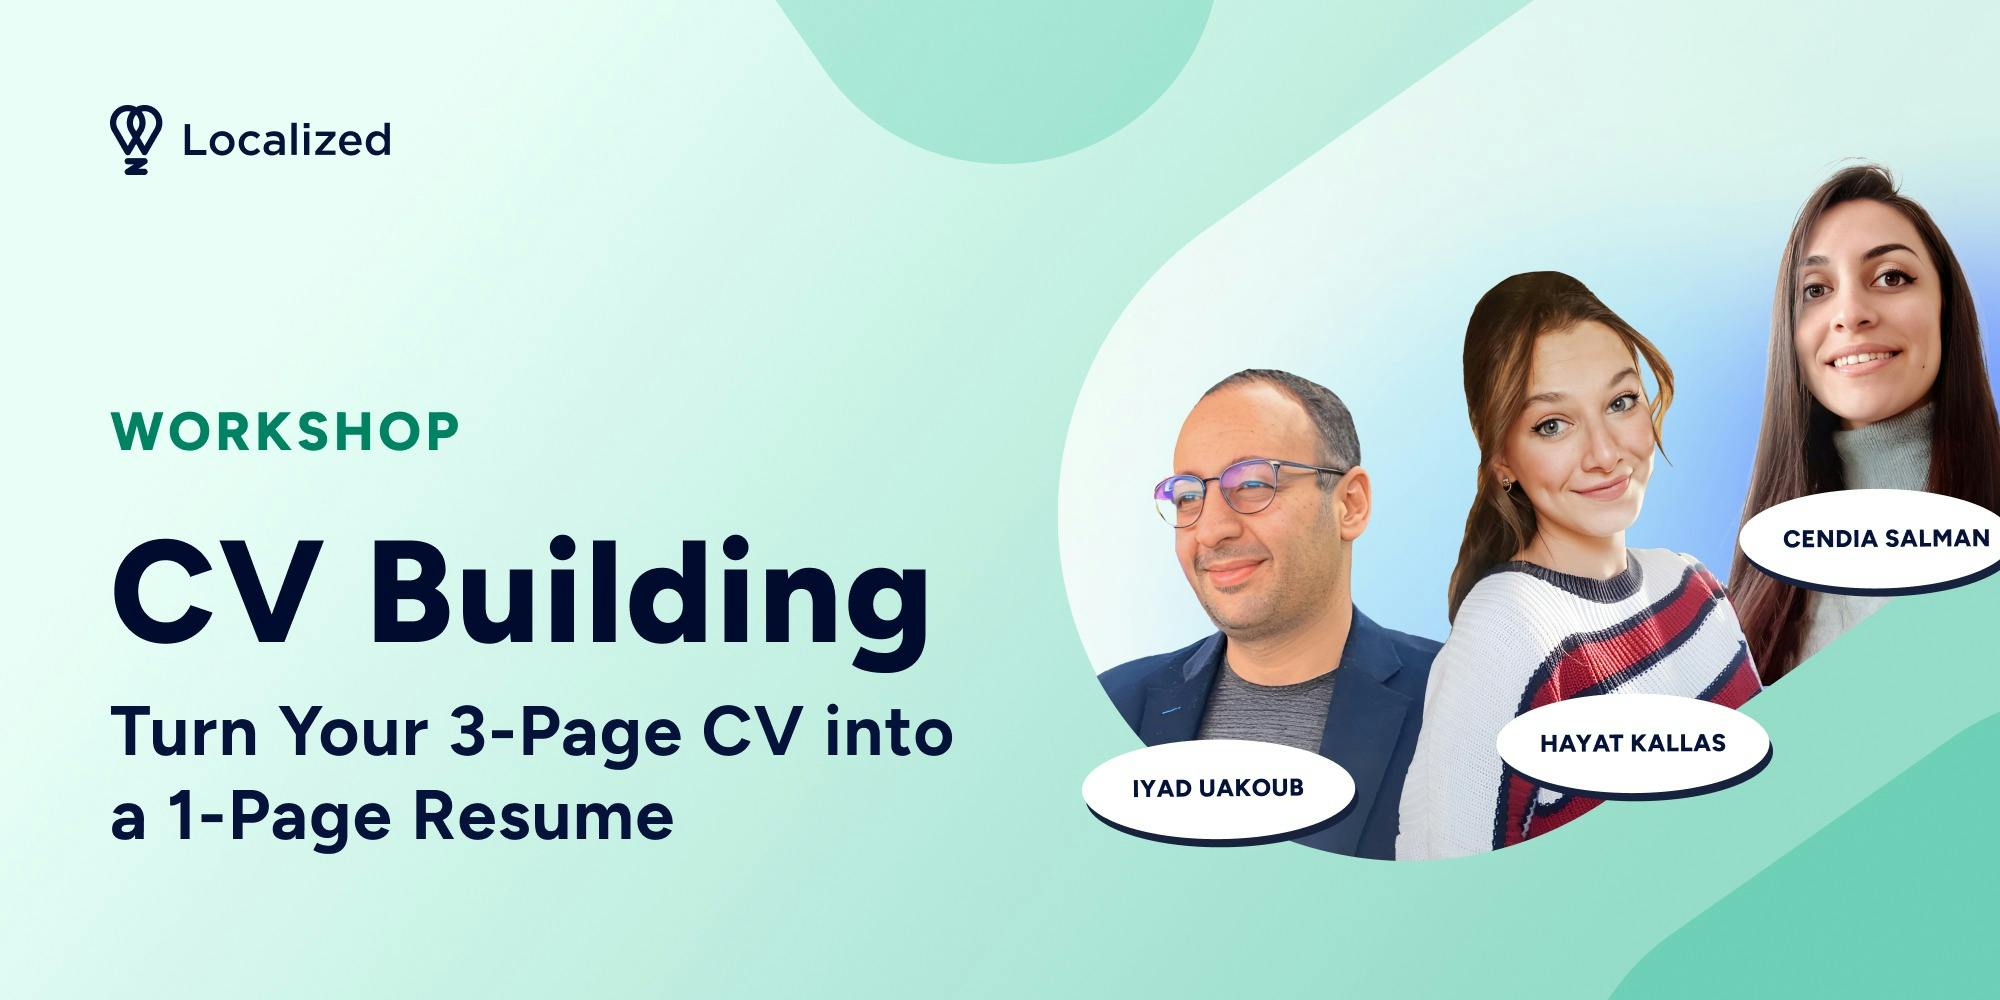 Workshop: Turn Your 3-Page CV into a 1-Page Resume (for Jobs in MENA)!